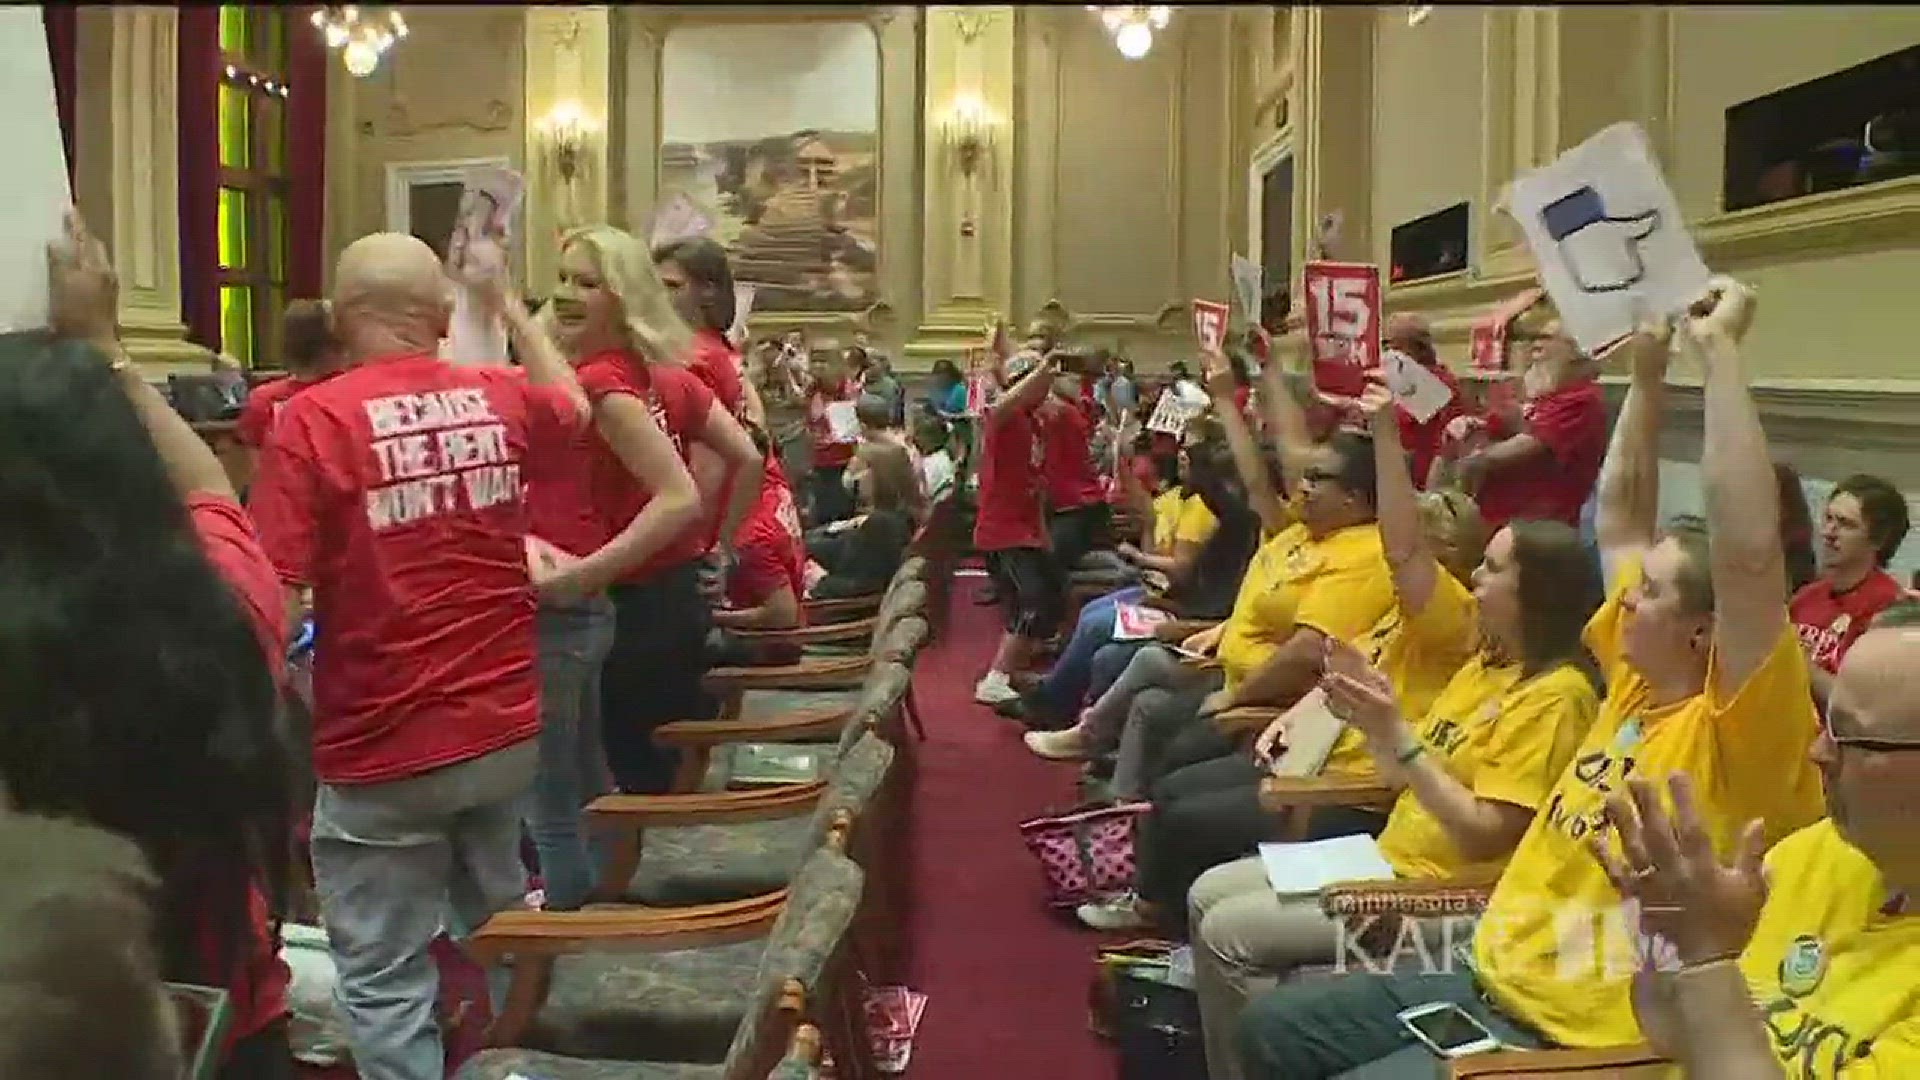 Minneapolis council approves $15 an hour minimum wage